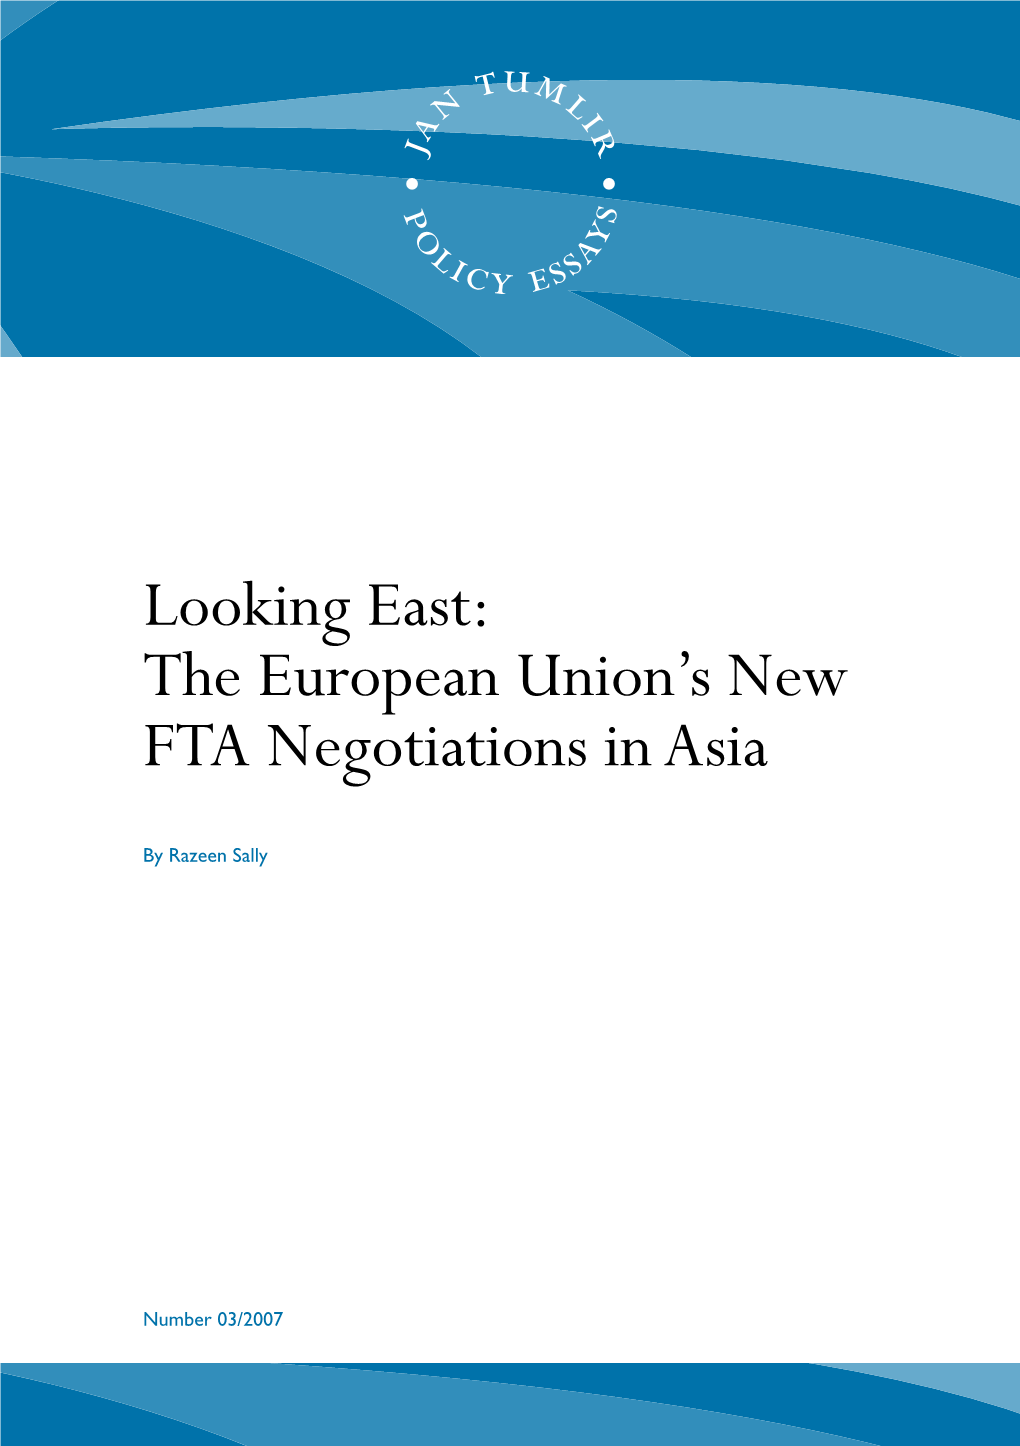 Looking East: the European Union's New FTA Negotiations in Asia